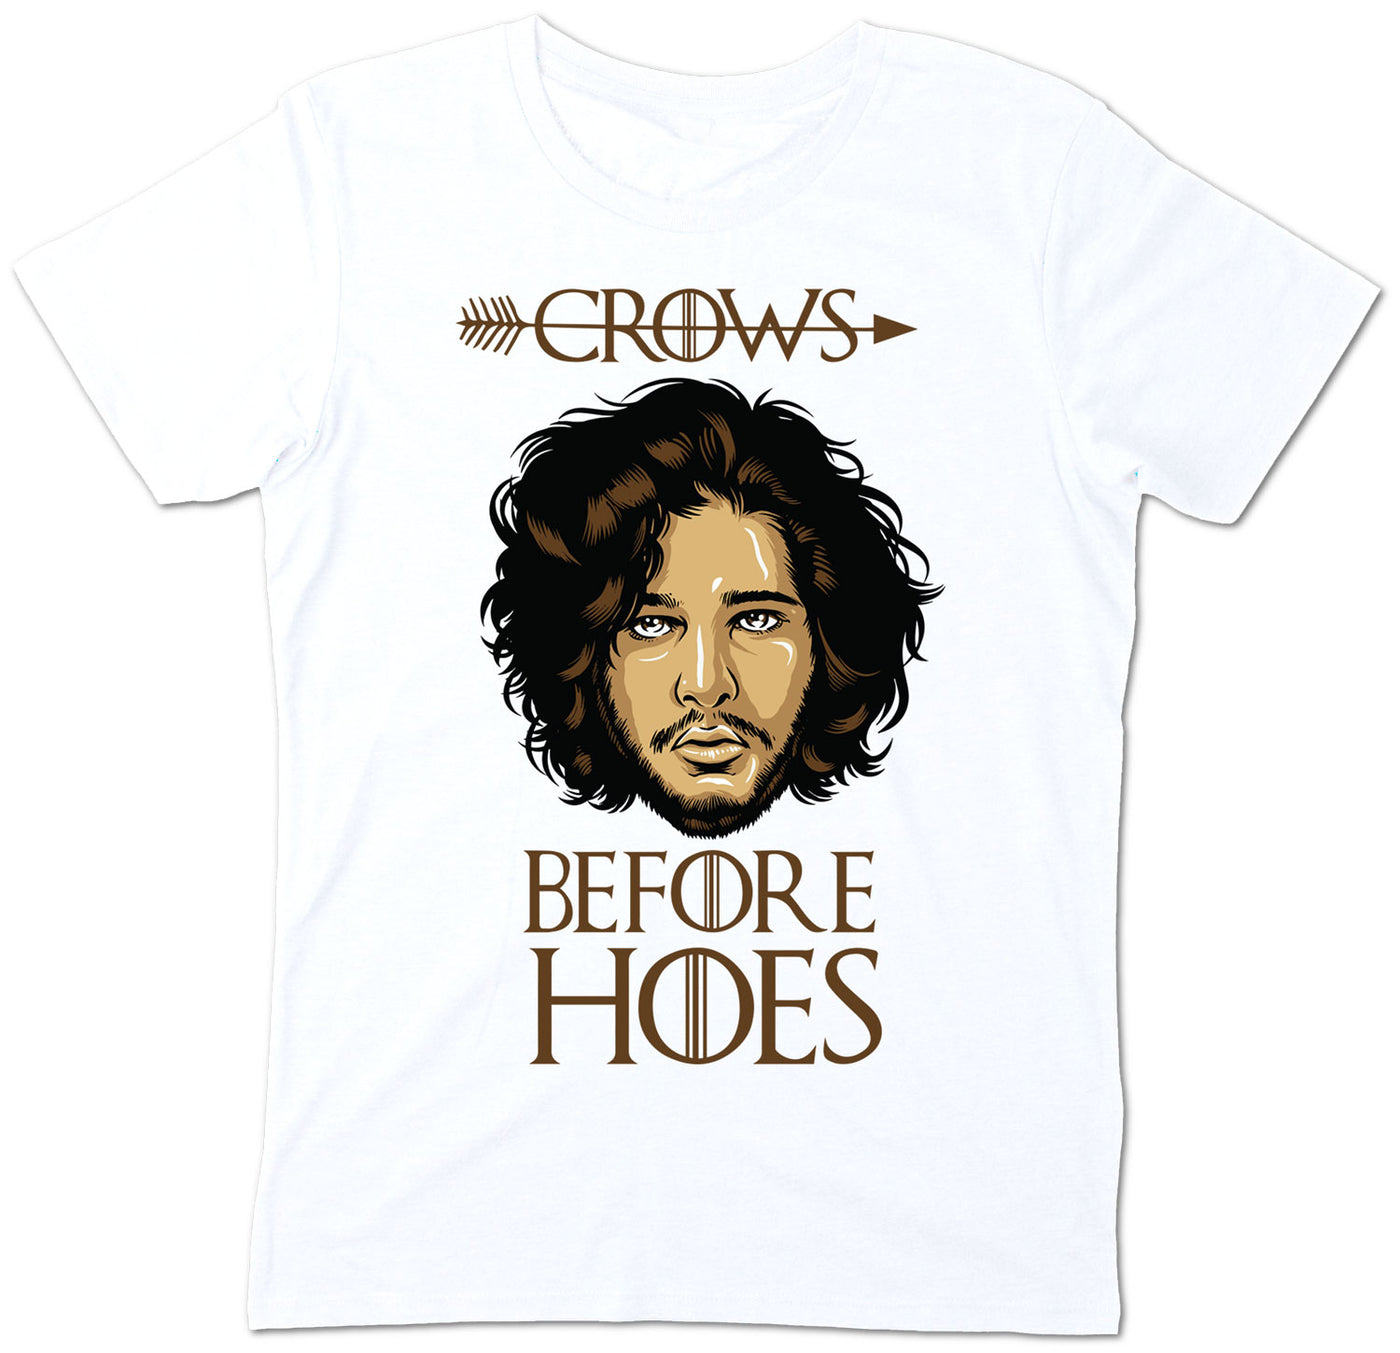 crows-before-hoes-jon-snow-dd-40